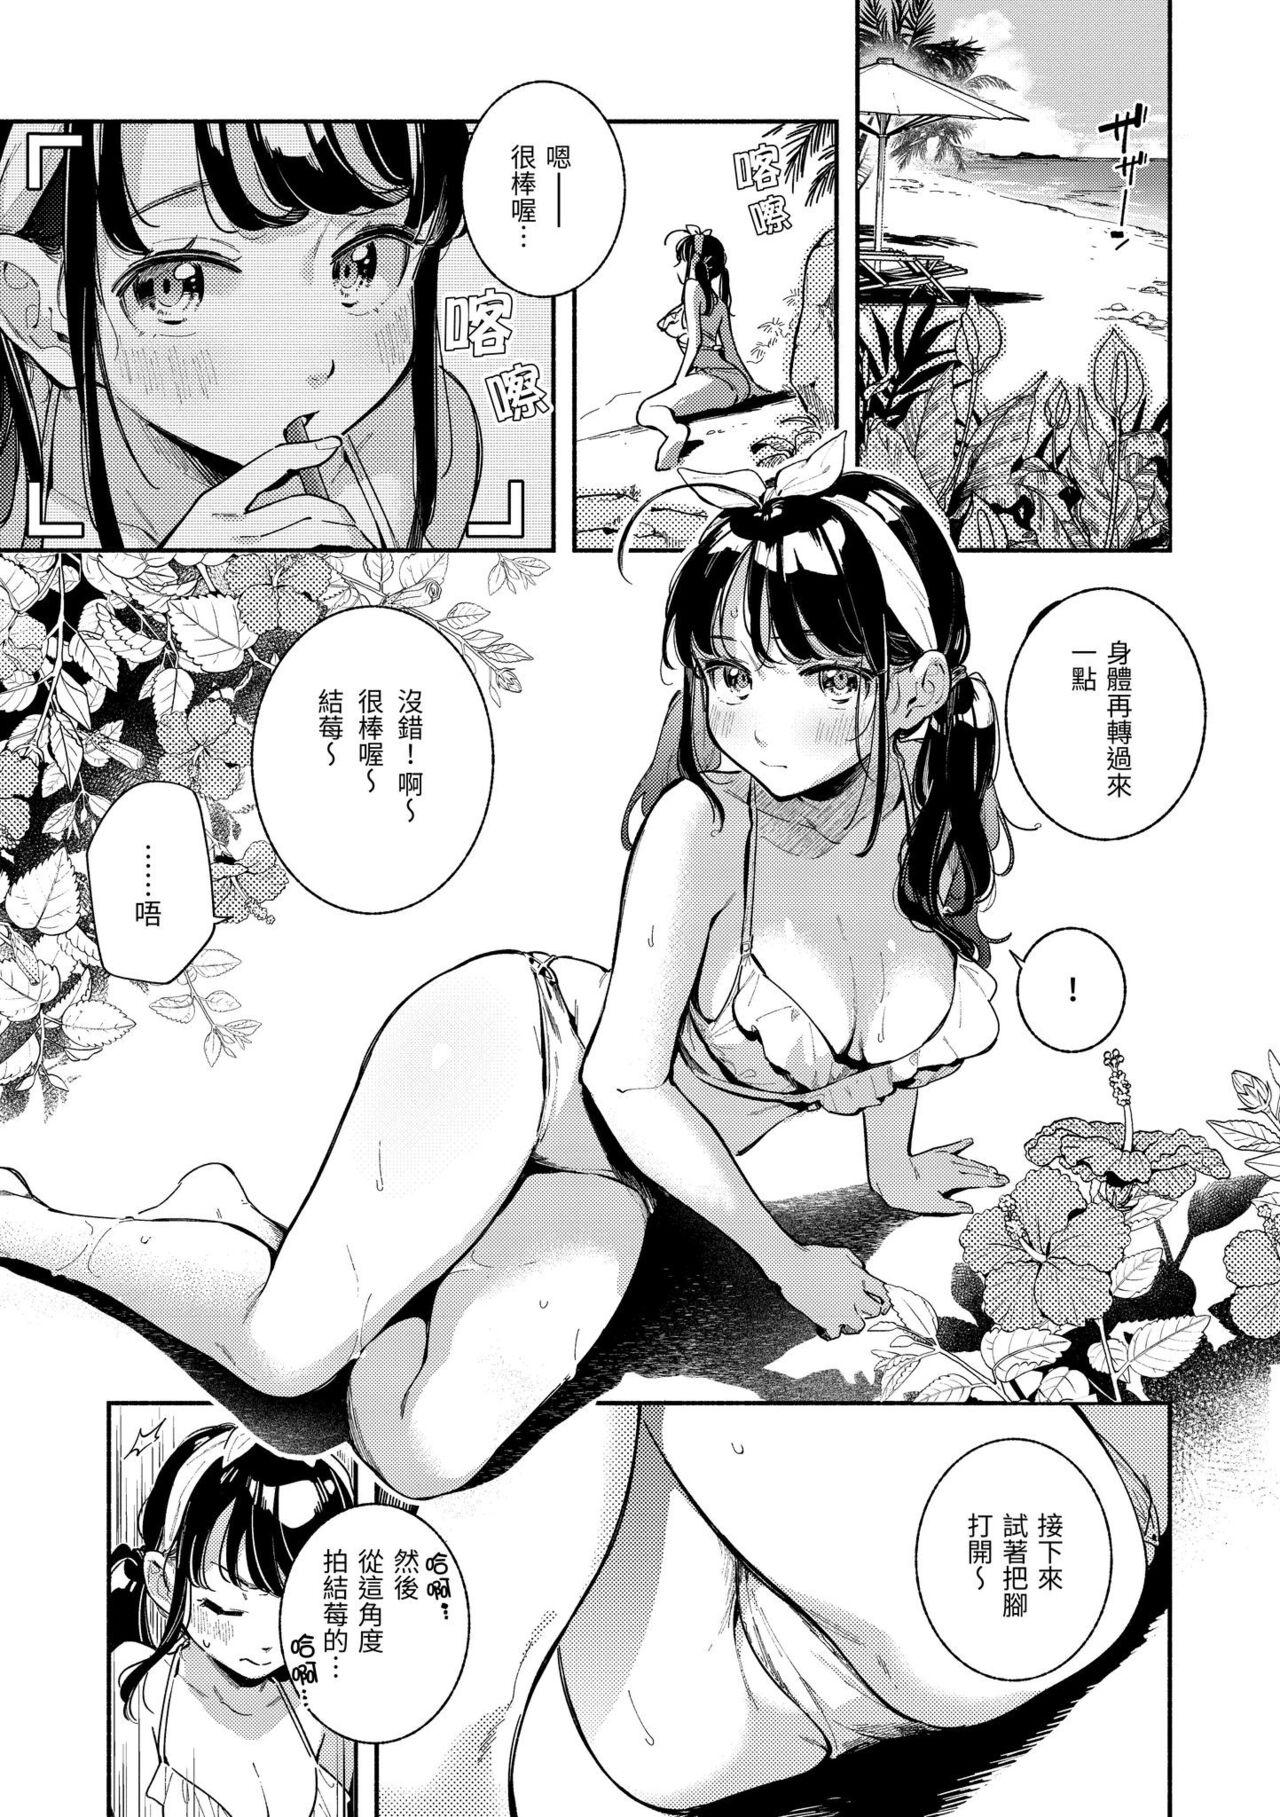 Stud Gochisousama - That was delicious. | 謝謝招待 Ducha - Page 4